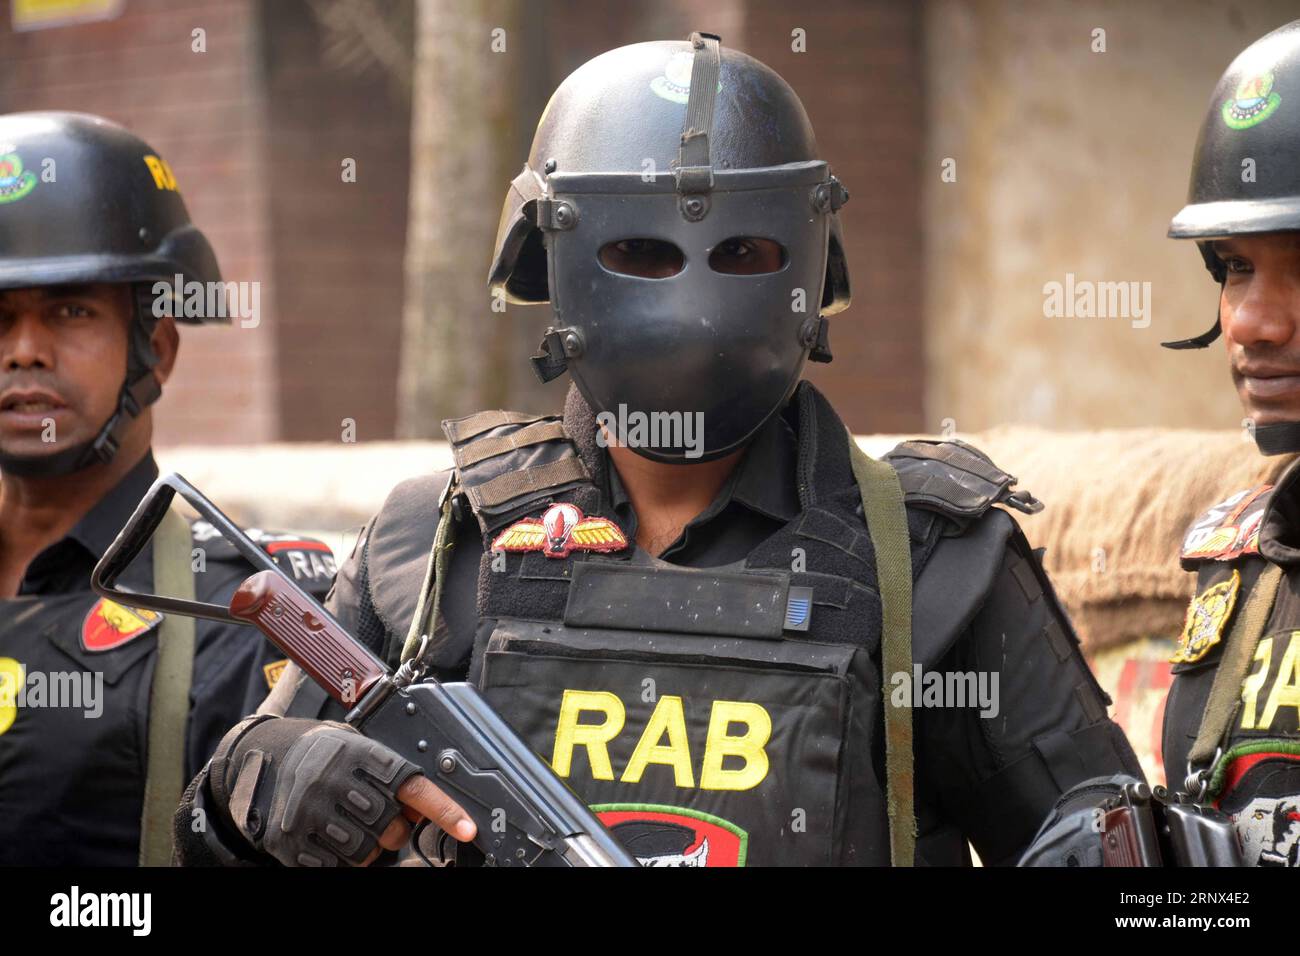 (180112) -- DHAKA, Jan. 12, 2018 -- Members of Rapid Action Battalion are seen in Dhaka, capital of Bangladesh, Jan. 12, 2018. Three militants were killed on Friday morning in a raid launched by Bangladesh s anti-crime elite force on a militant hideout near Prime Minister Sheikh Hasina s office in capital Dhaka. ) (whw) BANGLADESH-DHAKA-MILITANT-HIDEOUT-RAID Salimxreza PUBLICATIONxNOTxINxCHN Stock Photo